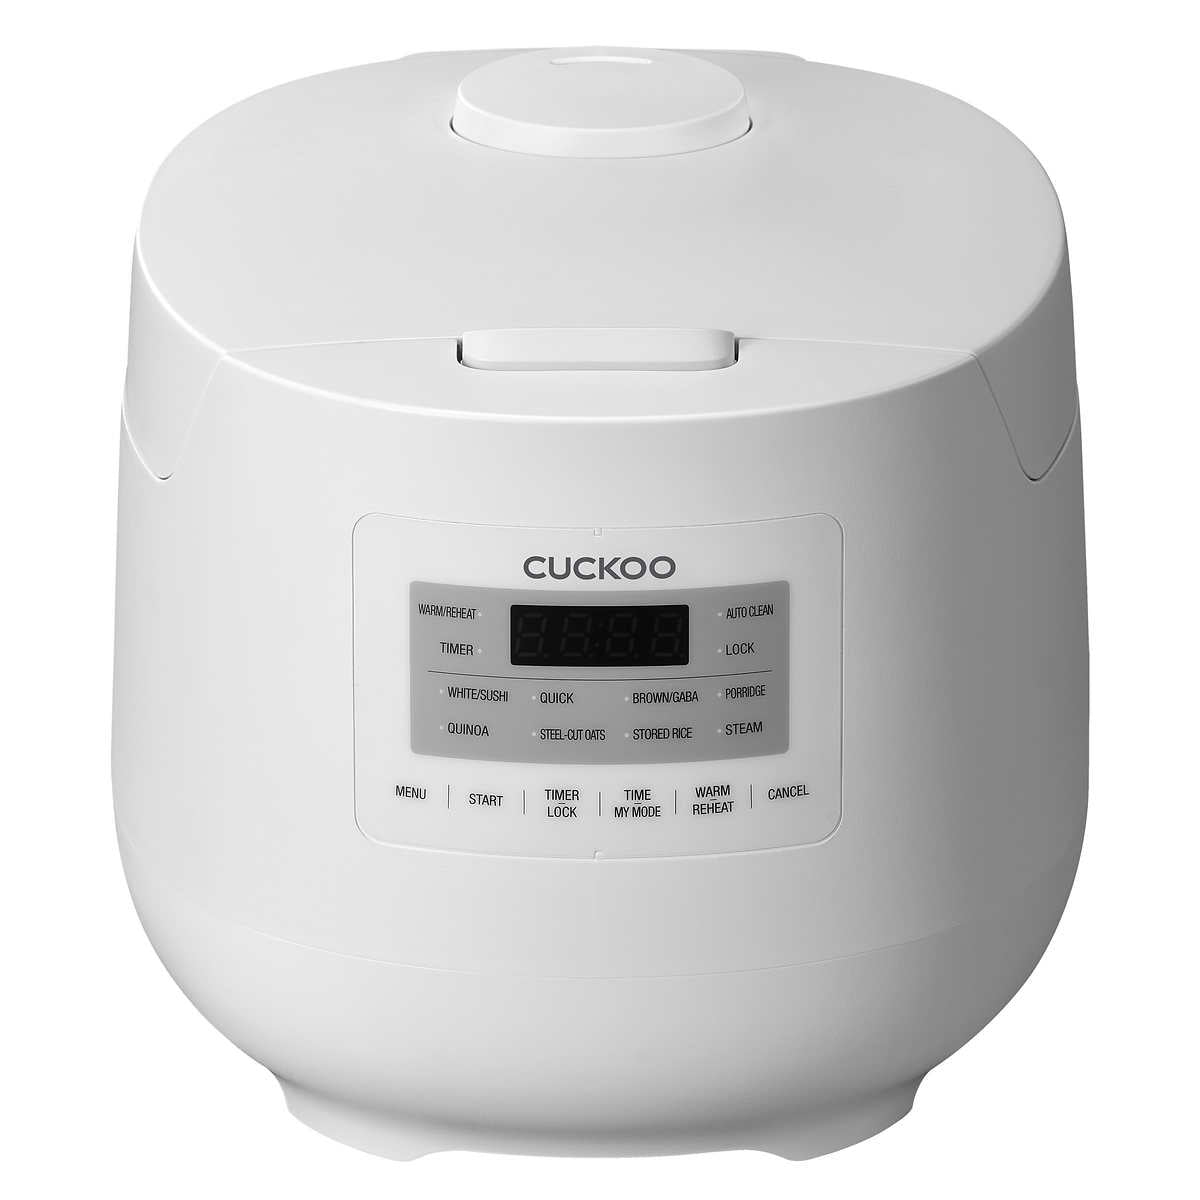 Cuckoo 6-cup Multifunctional Rice Cooker and Warmer Item